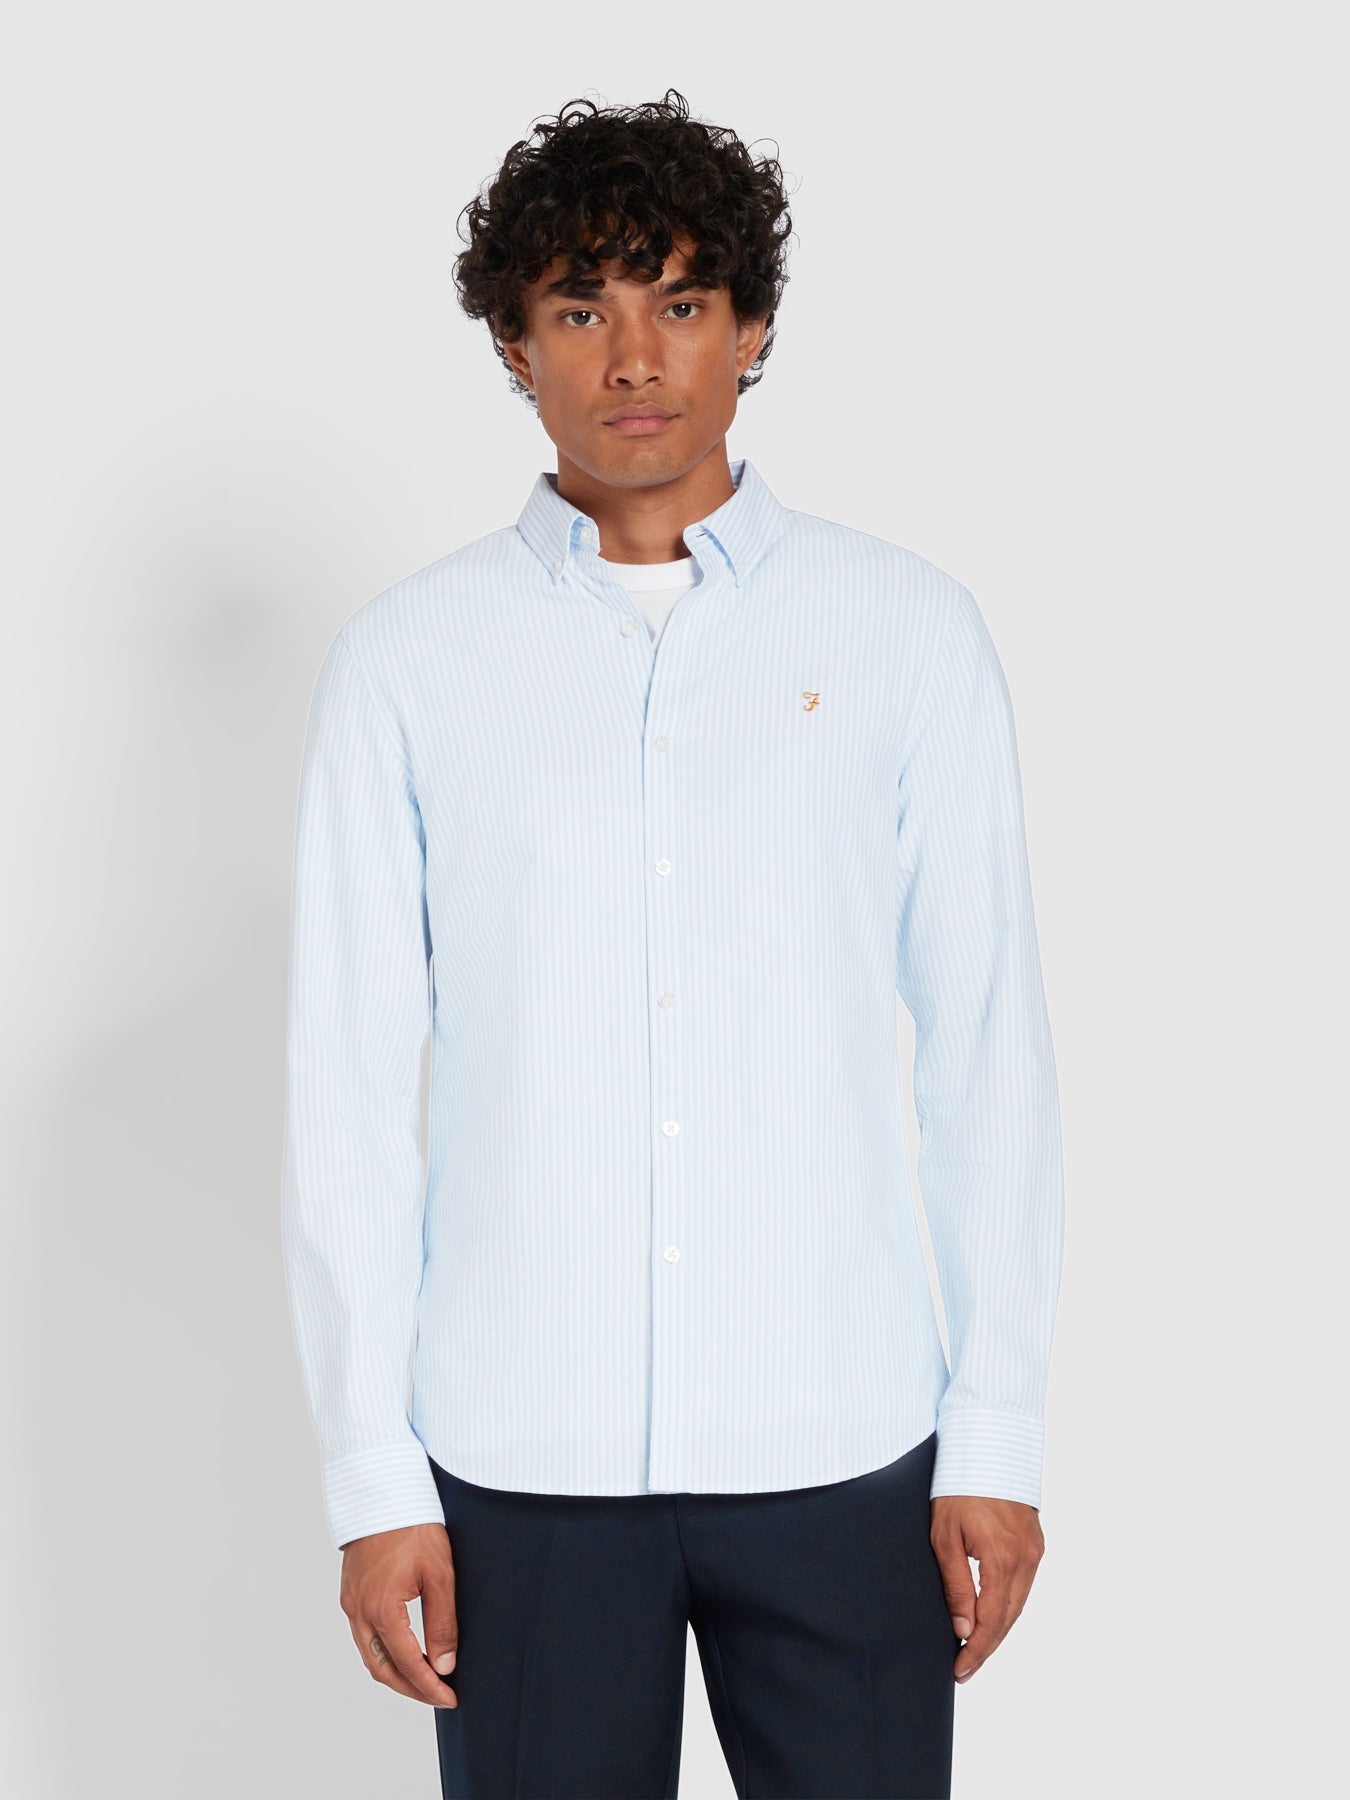 View Brewer Slim Fit Stripe Organic Cotton Oxford Shirt In Sky Blue information